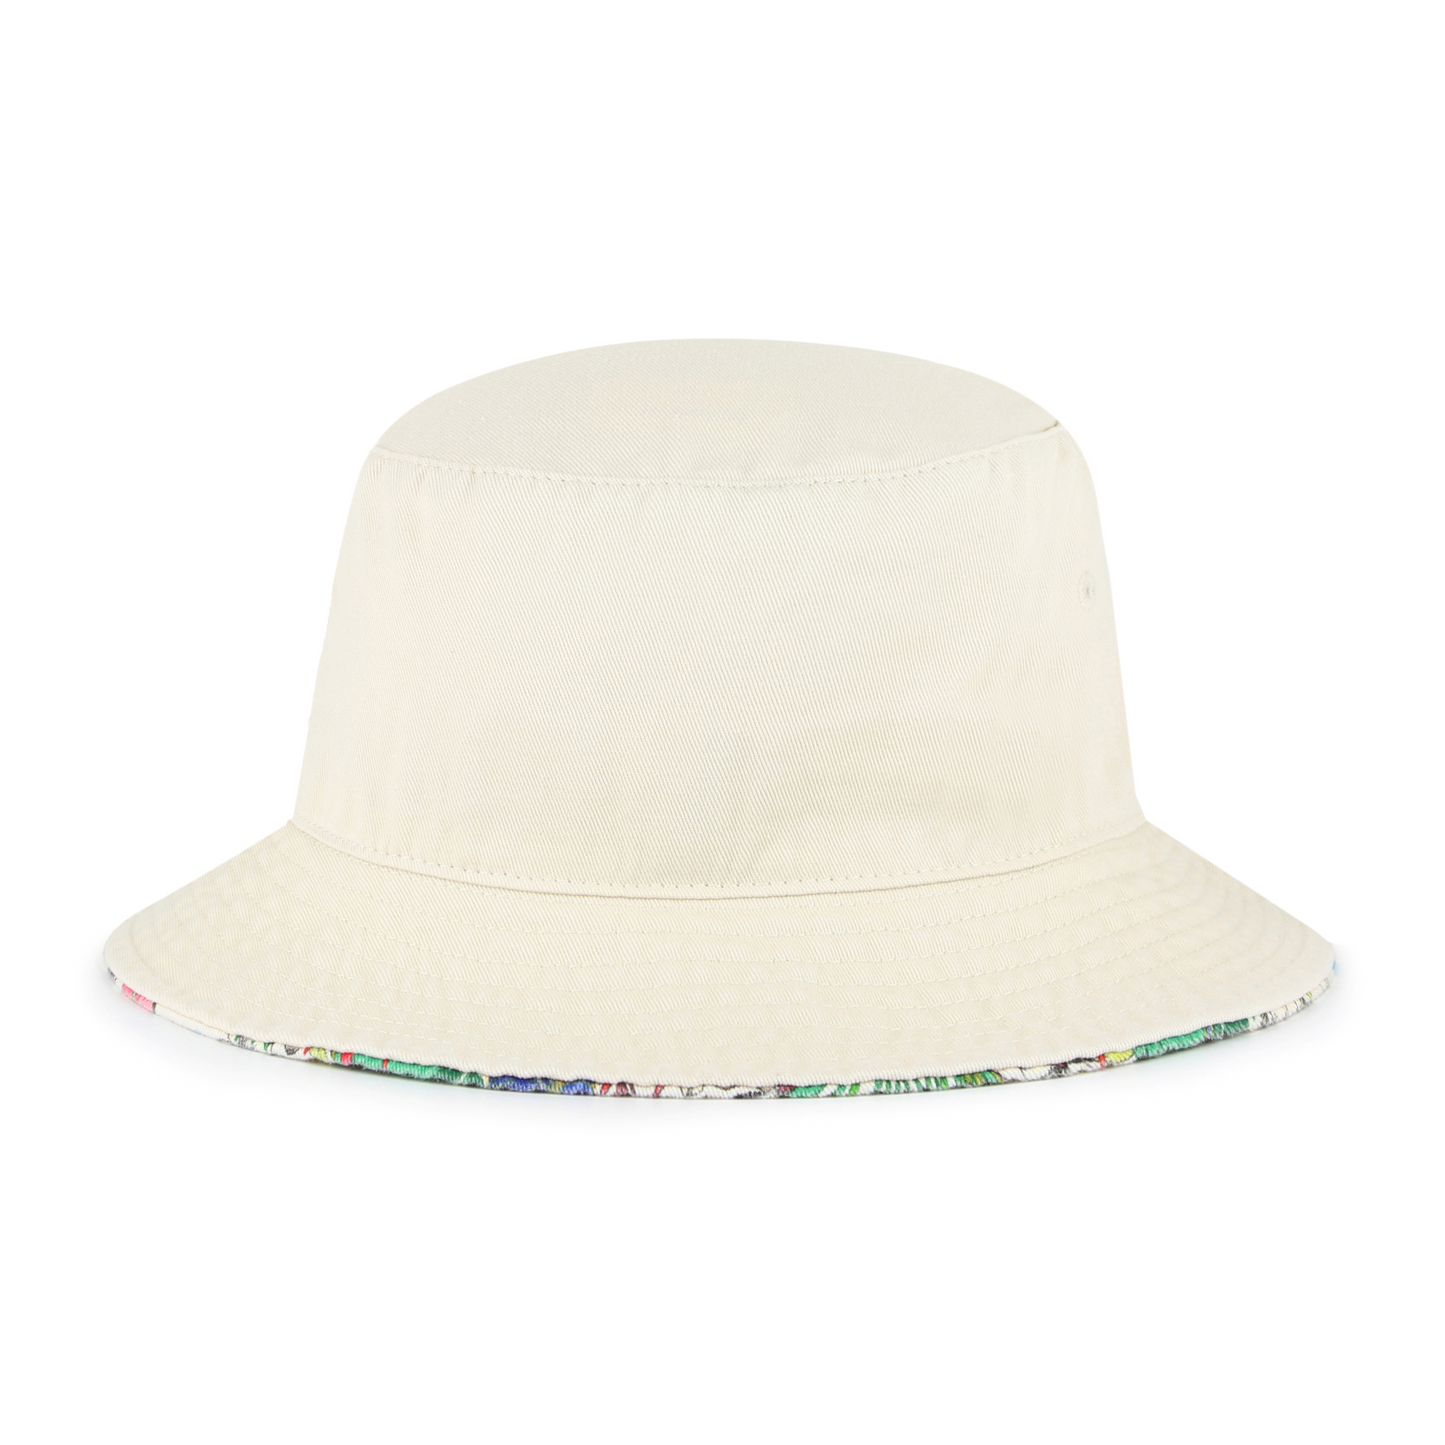 Back: White bucket hat with floral trim